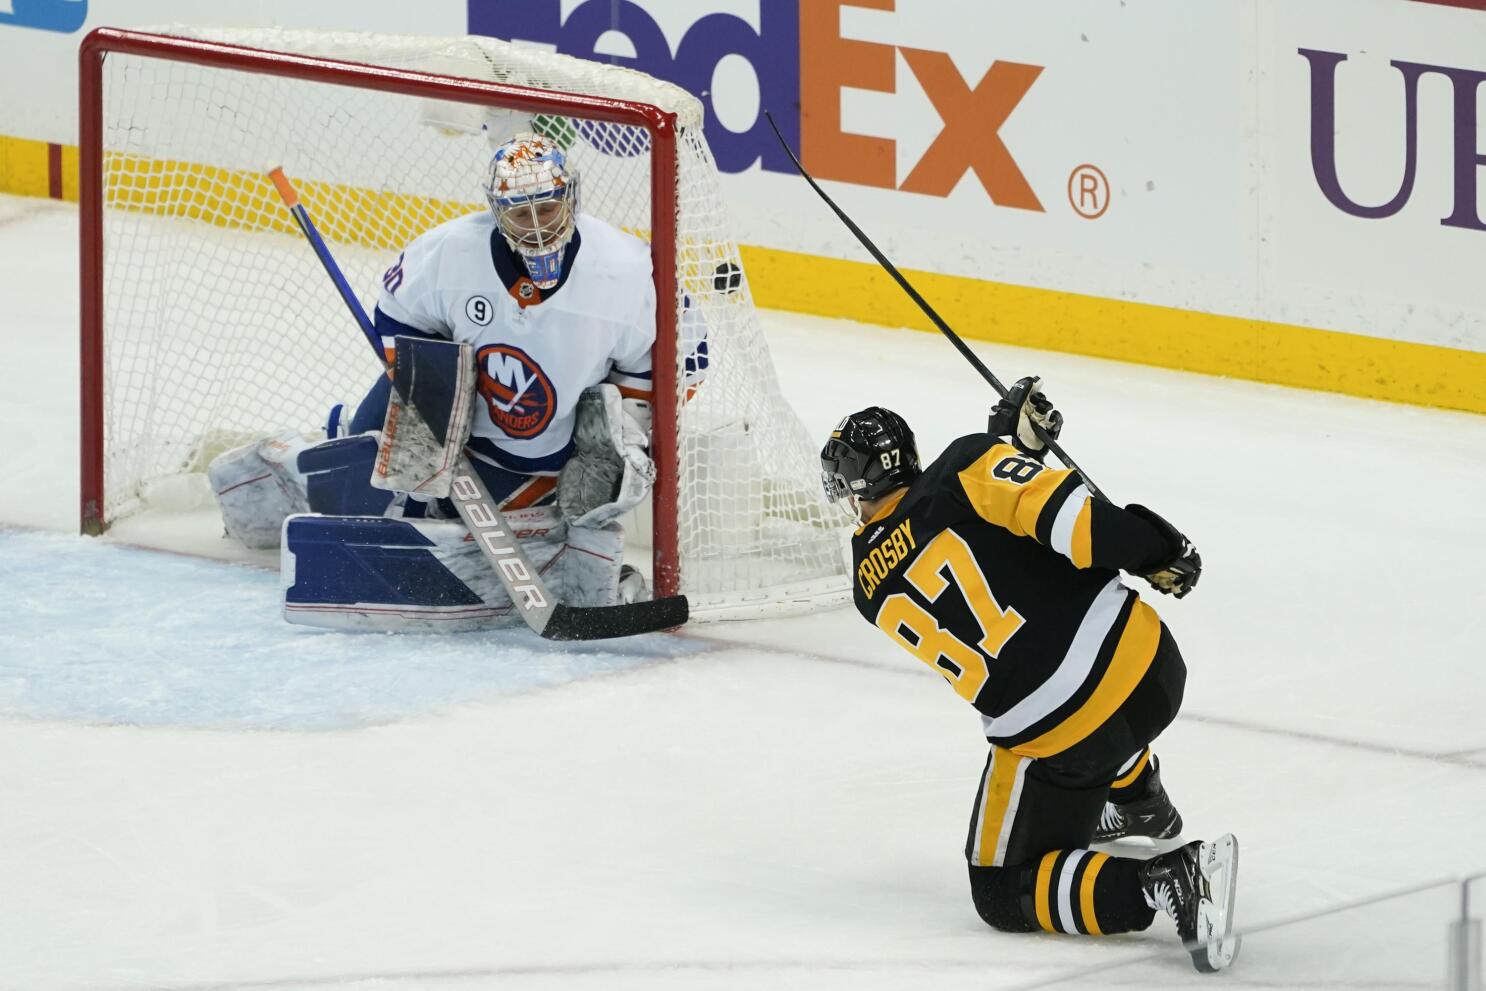 Penguins routed by Devils as losing streak hits 3 games